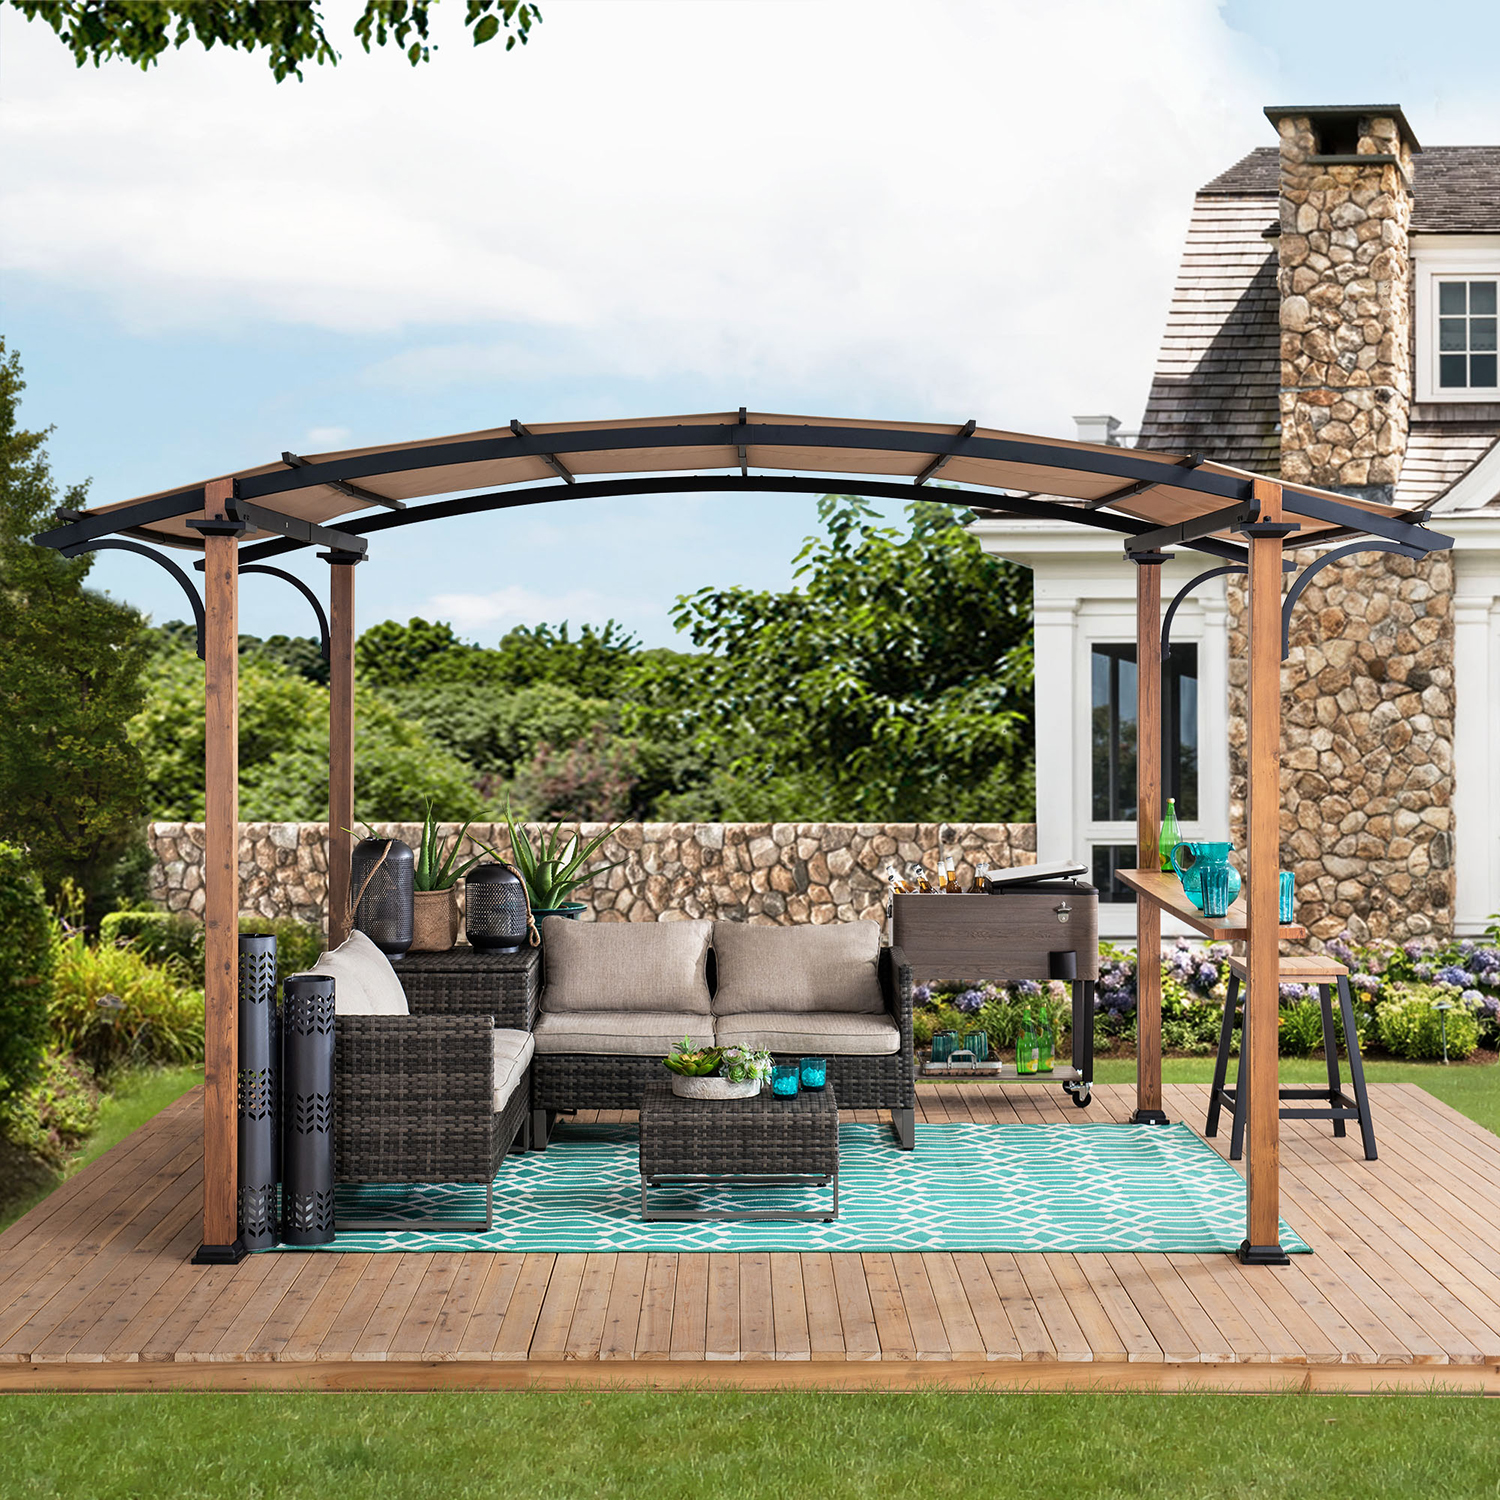 Sunjoy Beechhurst 8.5 ft. x 13 ft. Steel Arched Pergola with Natural Wood Looking Finish and Tan Shade - image 1 of 9